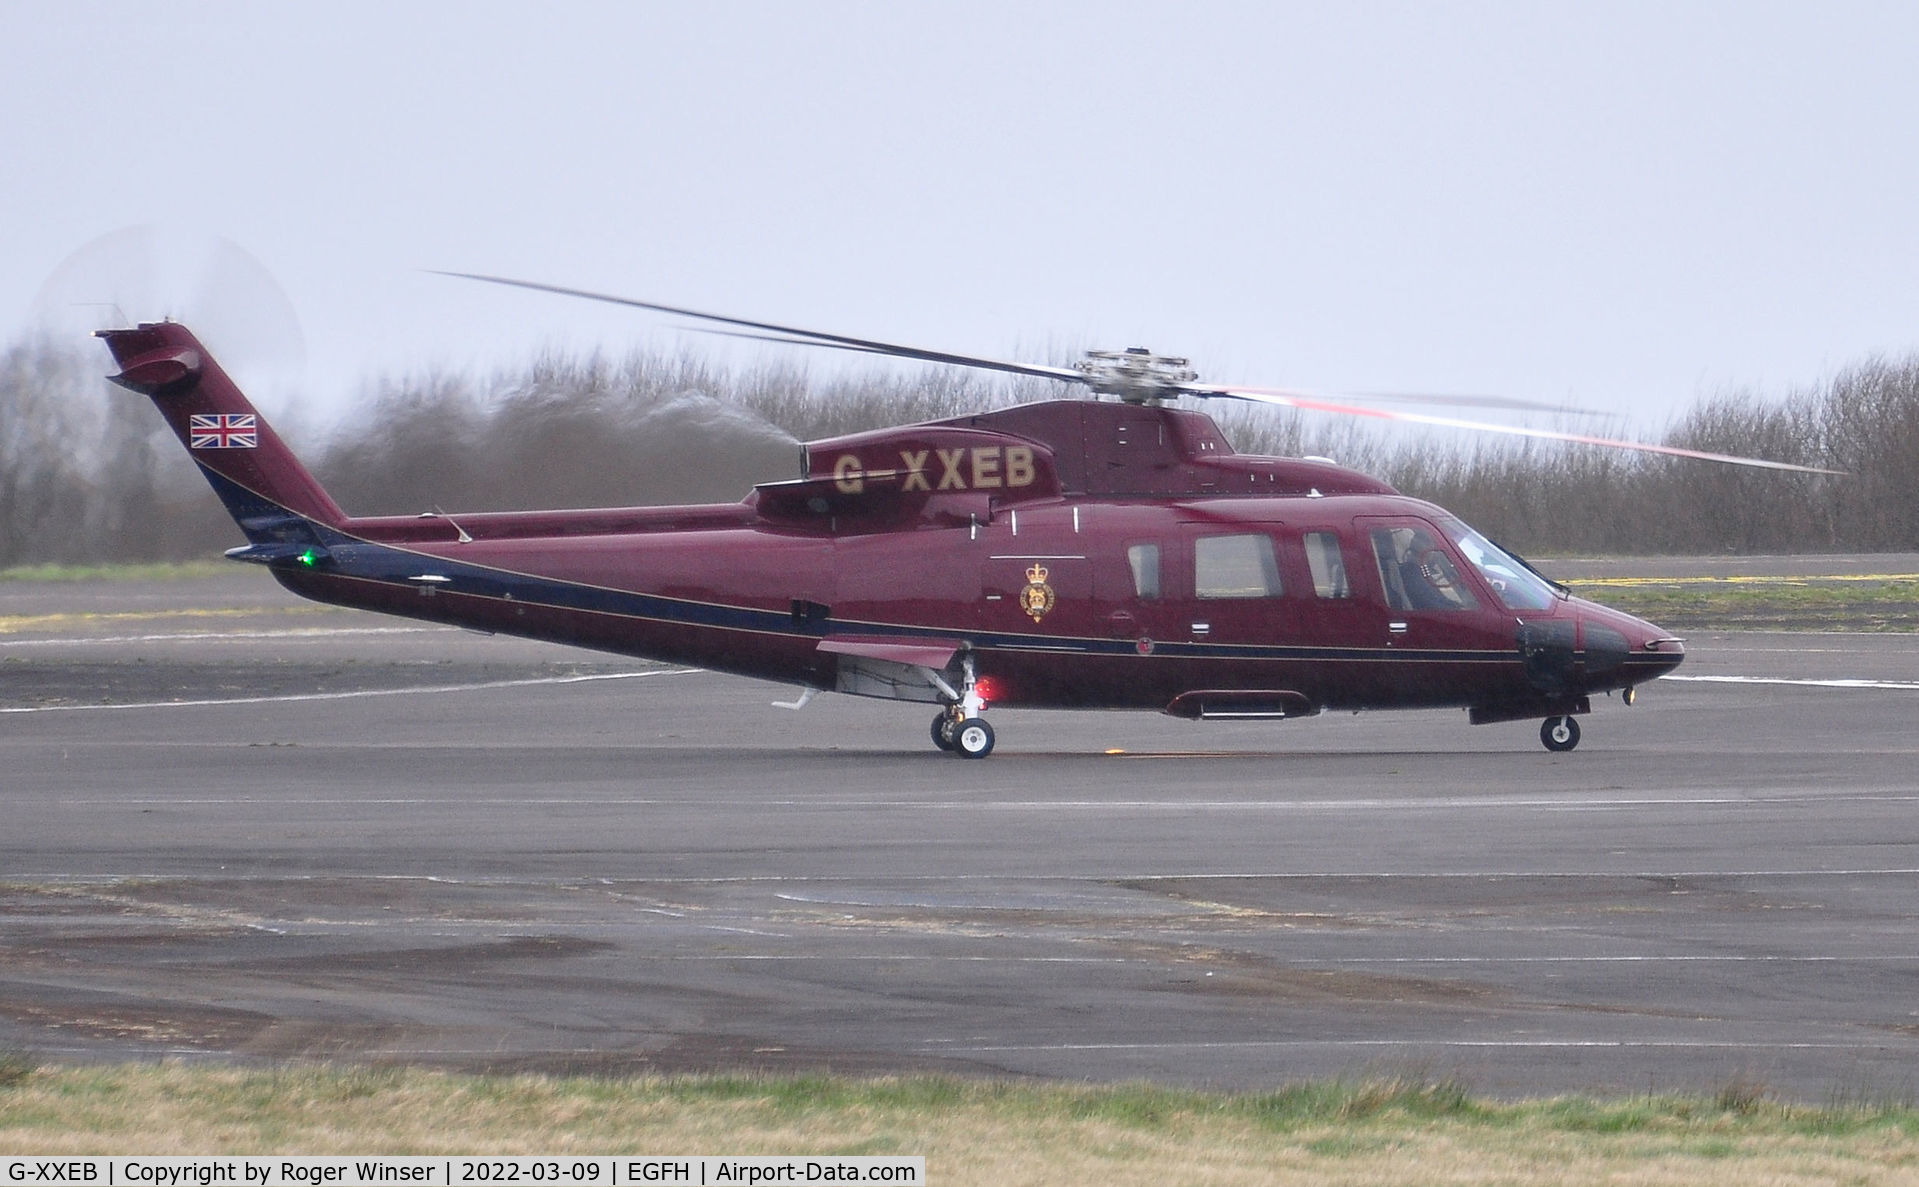 G-XXEB, 2009 Sikorsky S-76C C/N 760753, Visiting helicopter of the Queens Helicopter Flight.